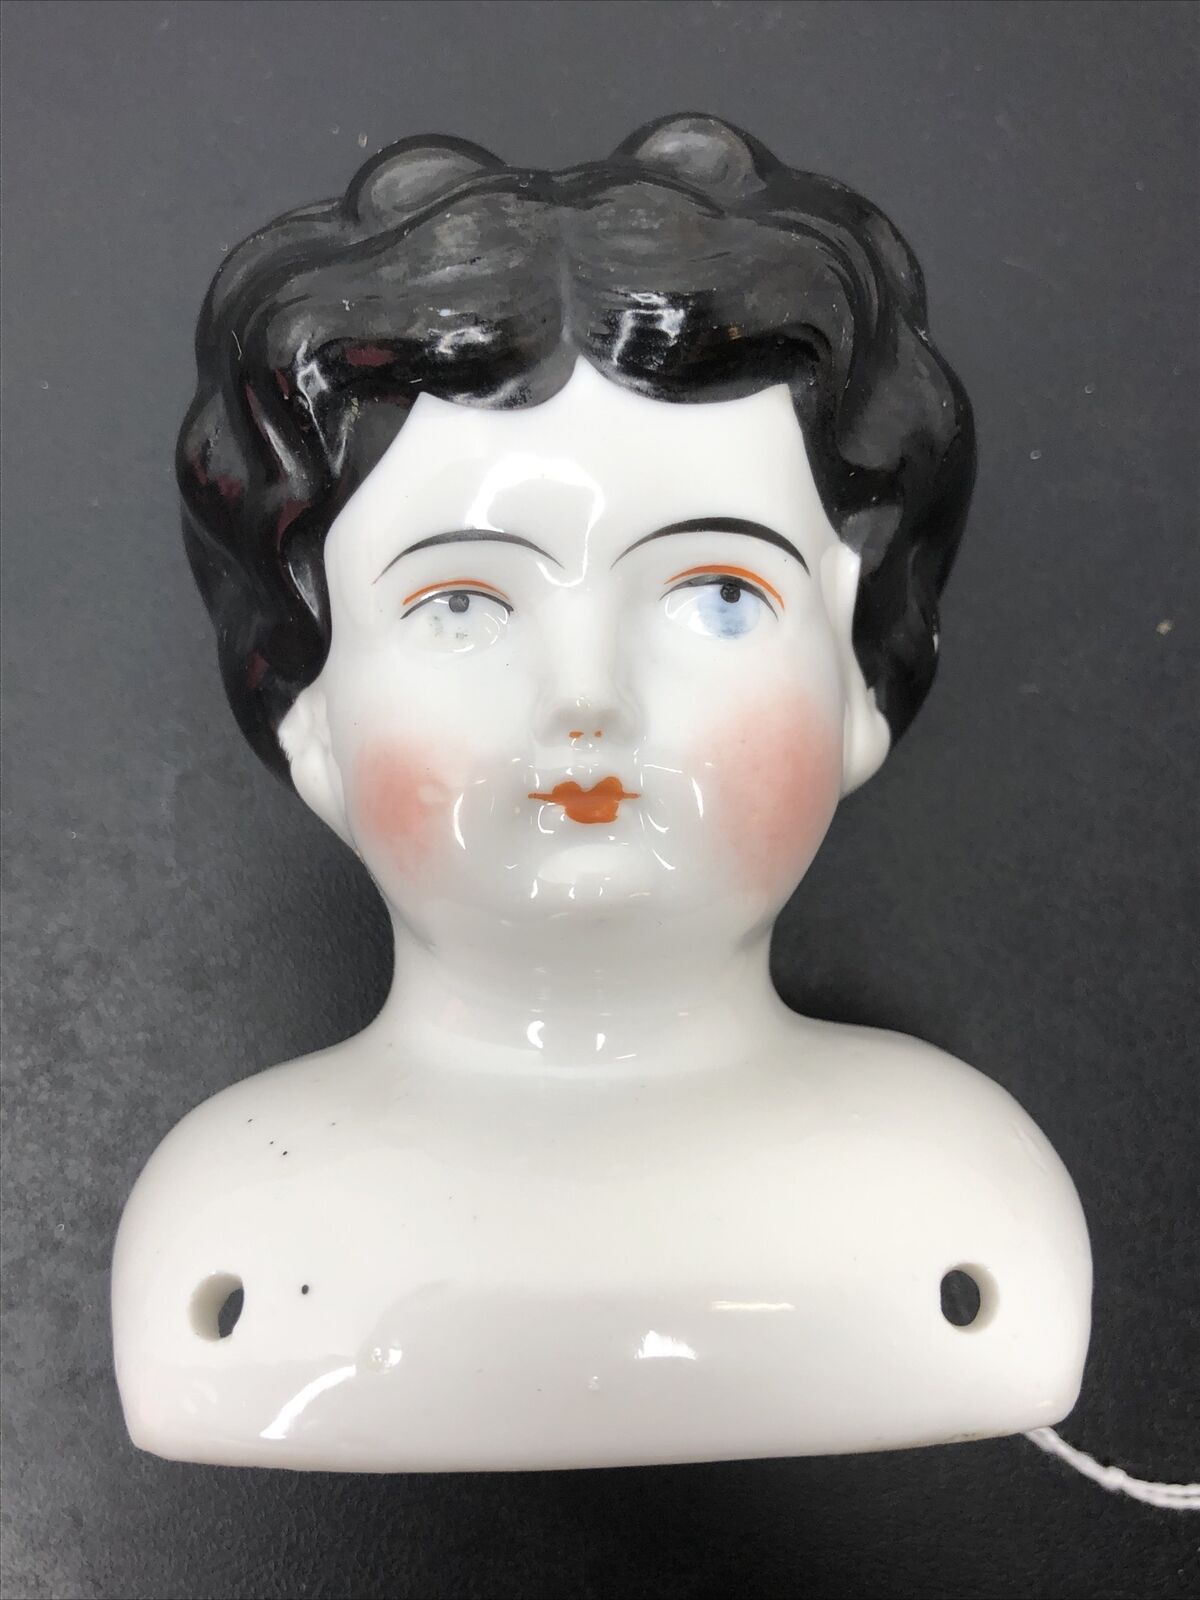 4” Antique Porcelain German Made China Head 3 Low Brow Style Hair 2.25” Deep #me